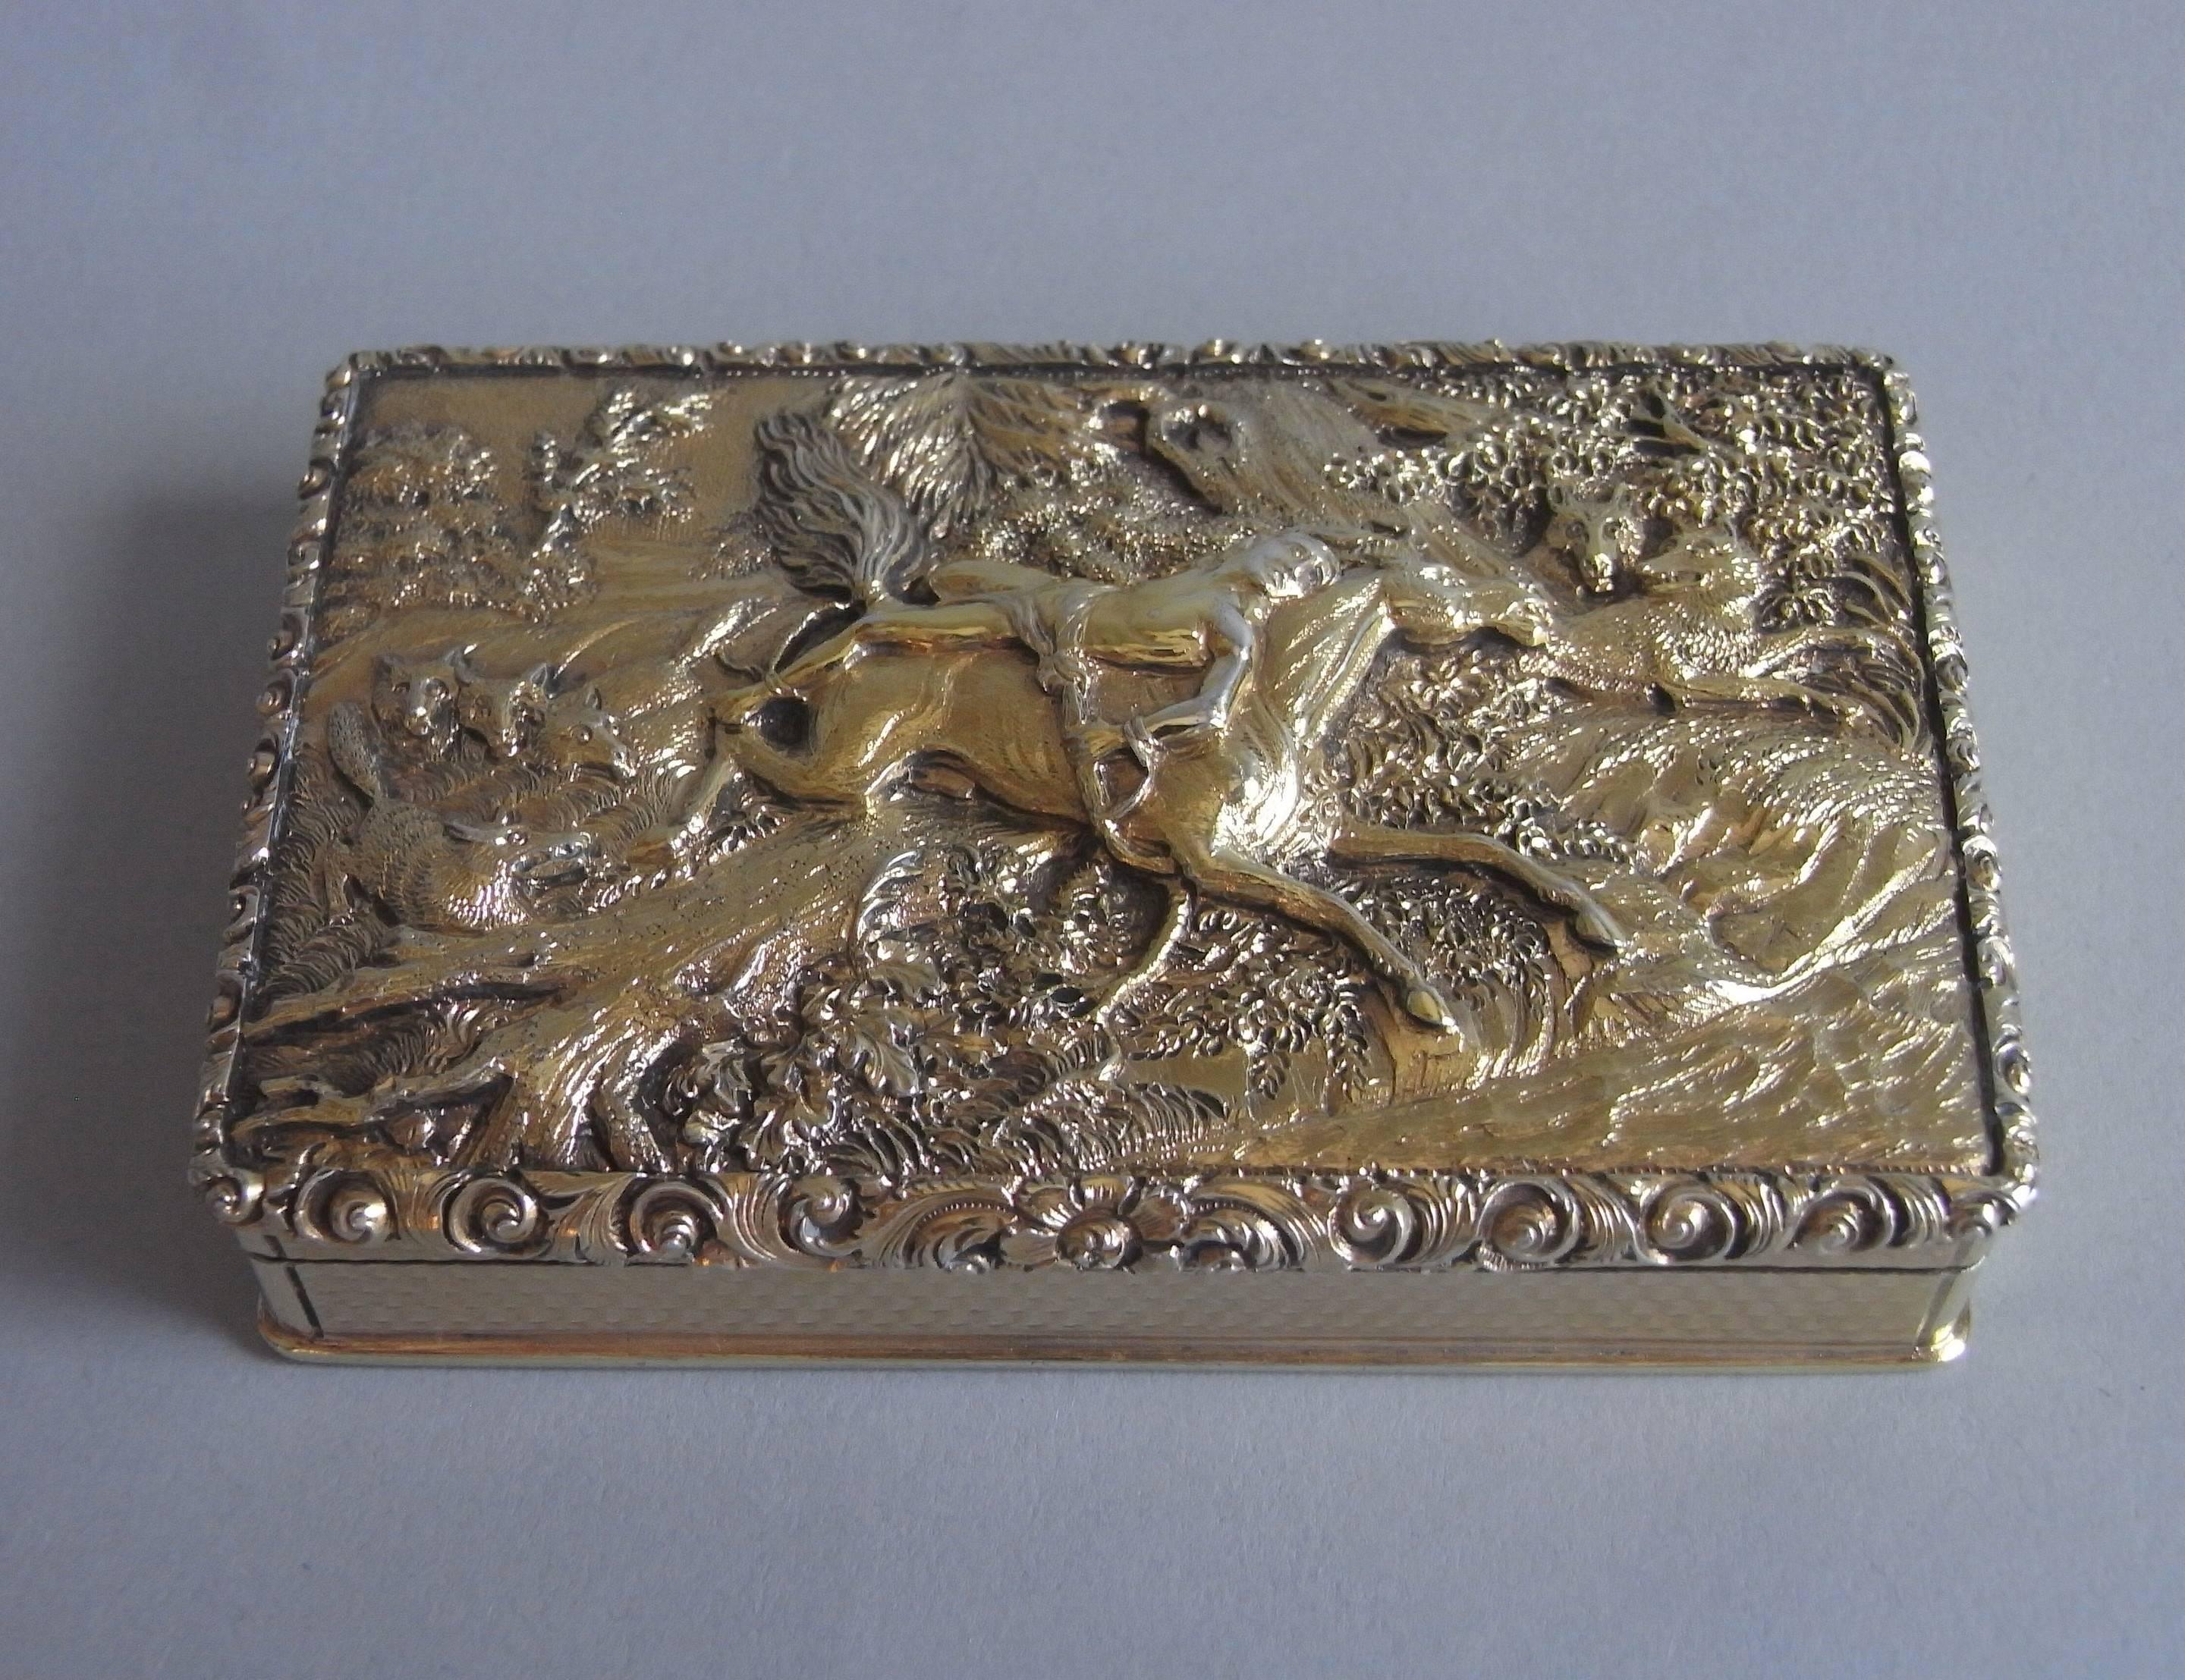 THE MAZEPPA BOX - A very rare and exceptional William IV Silver Gilt Table Snuff